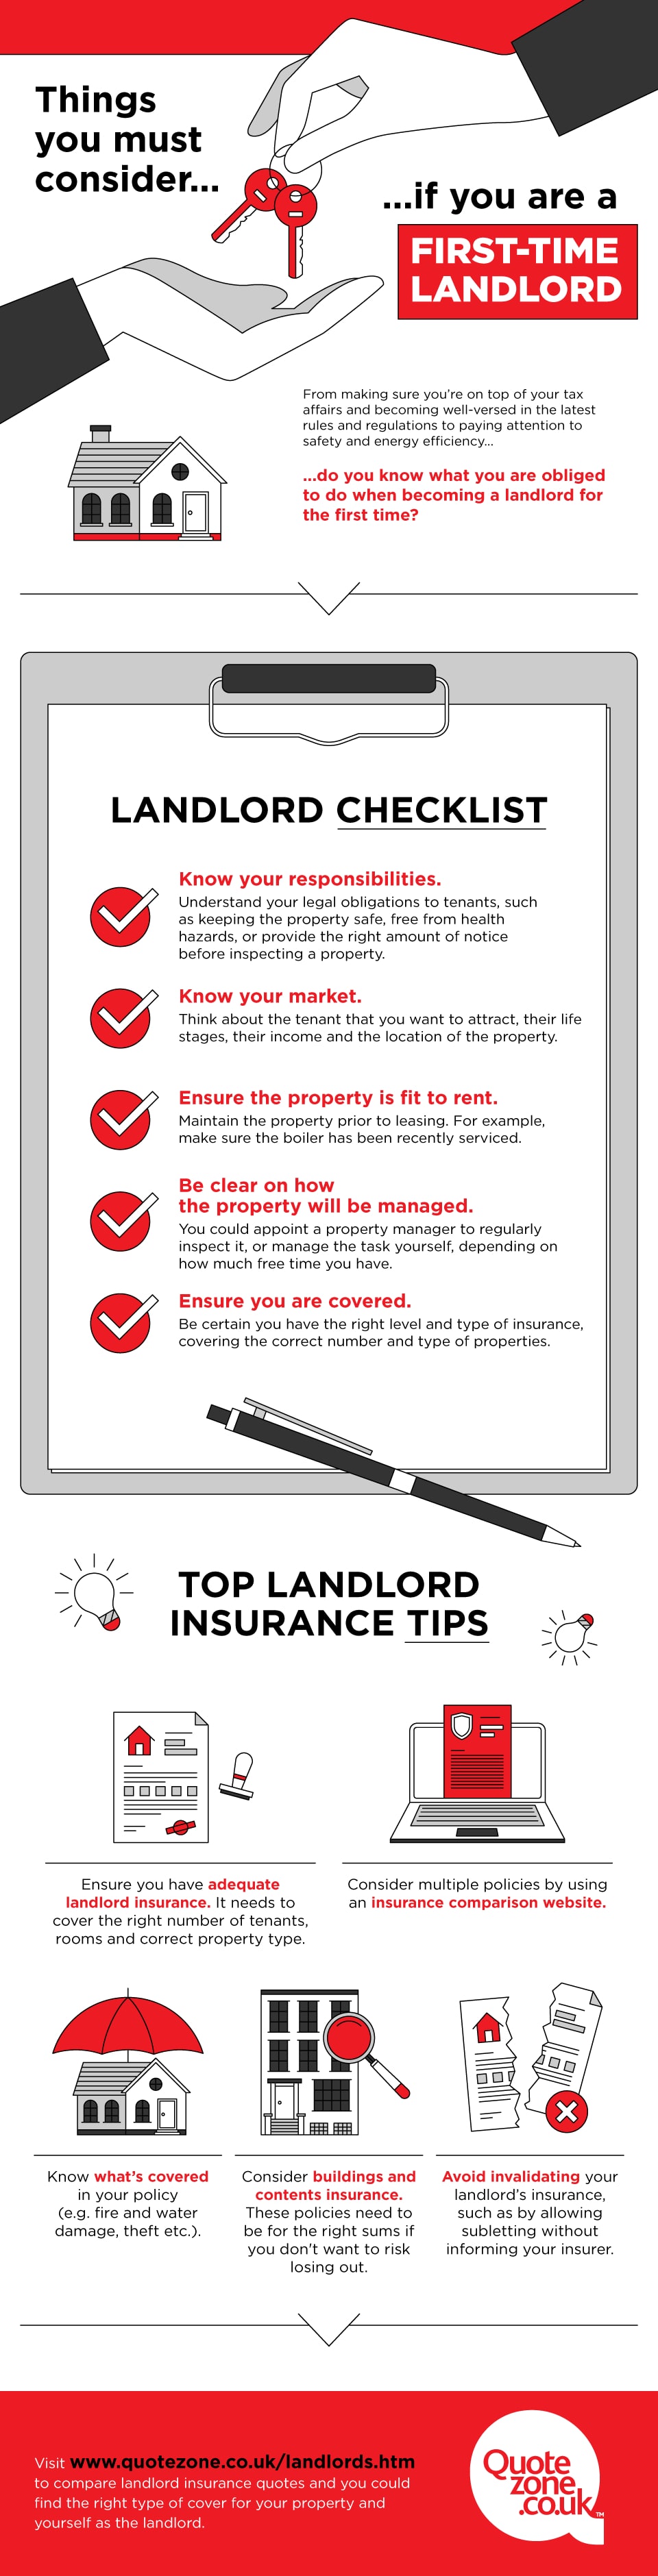 Quotezone-Landlord How to Prepare a Rental Property in 2018